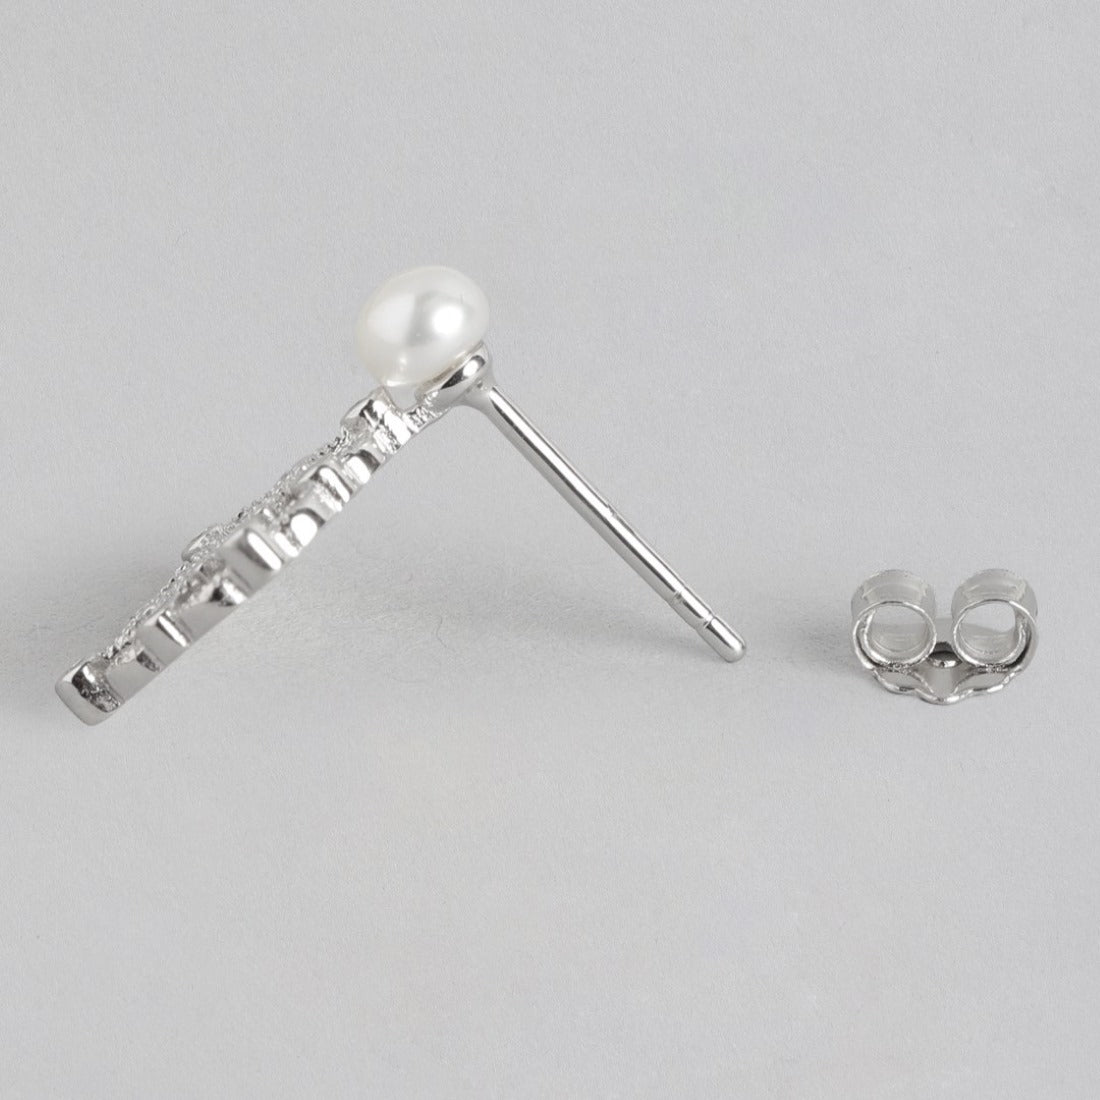 Pearl Square Radiance Rhodium-Plated 925 Sterling Silver Earrings